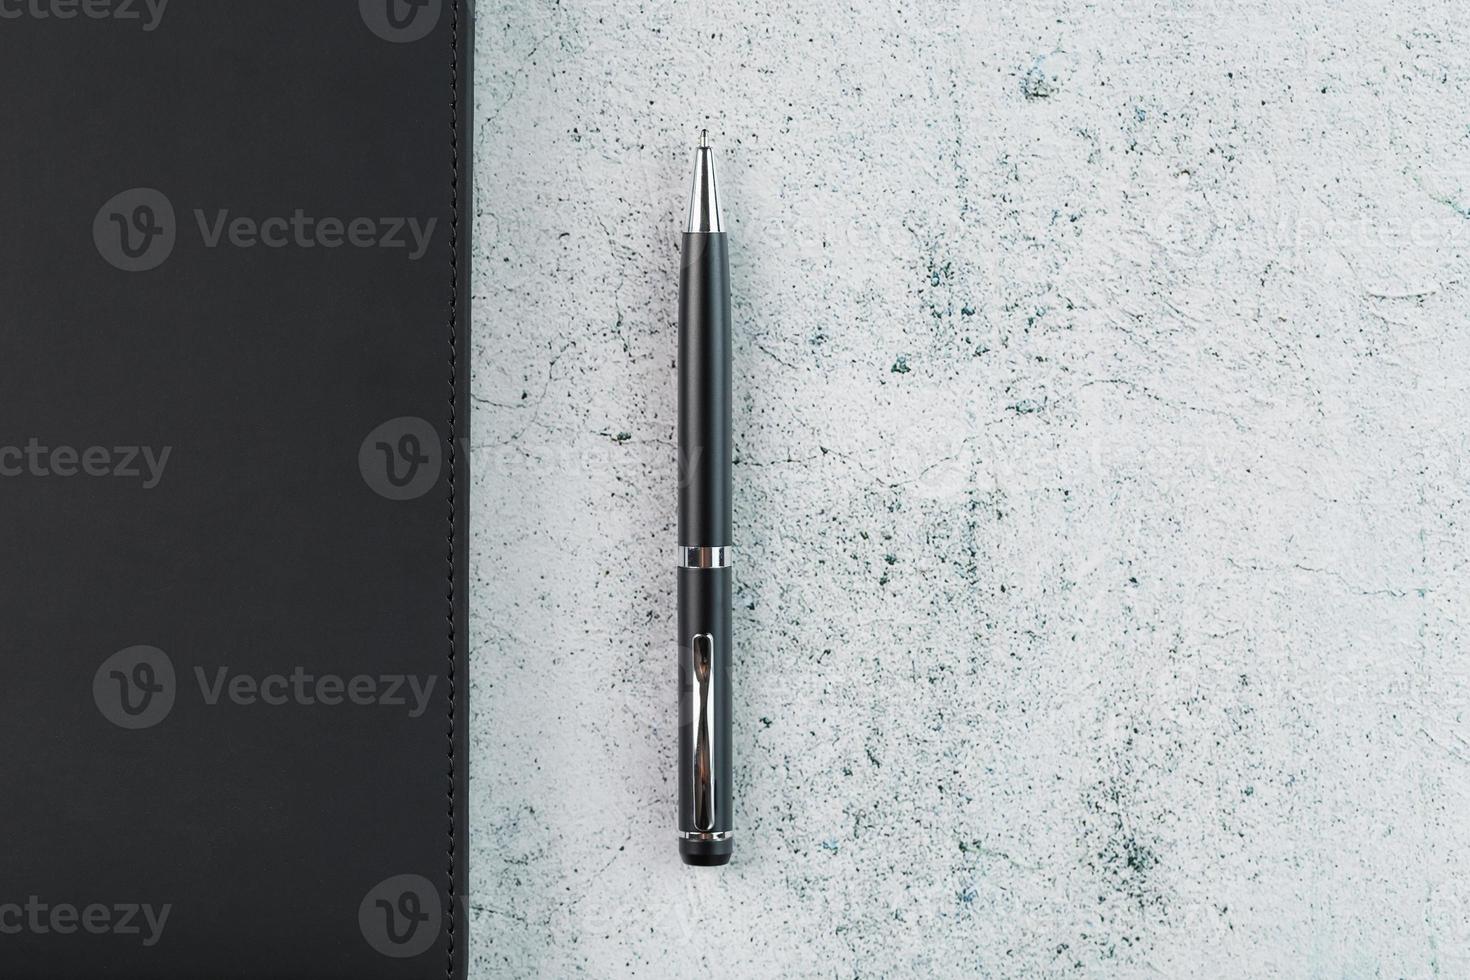 Black Notepad with a black pen on a gray background photo